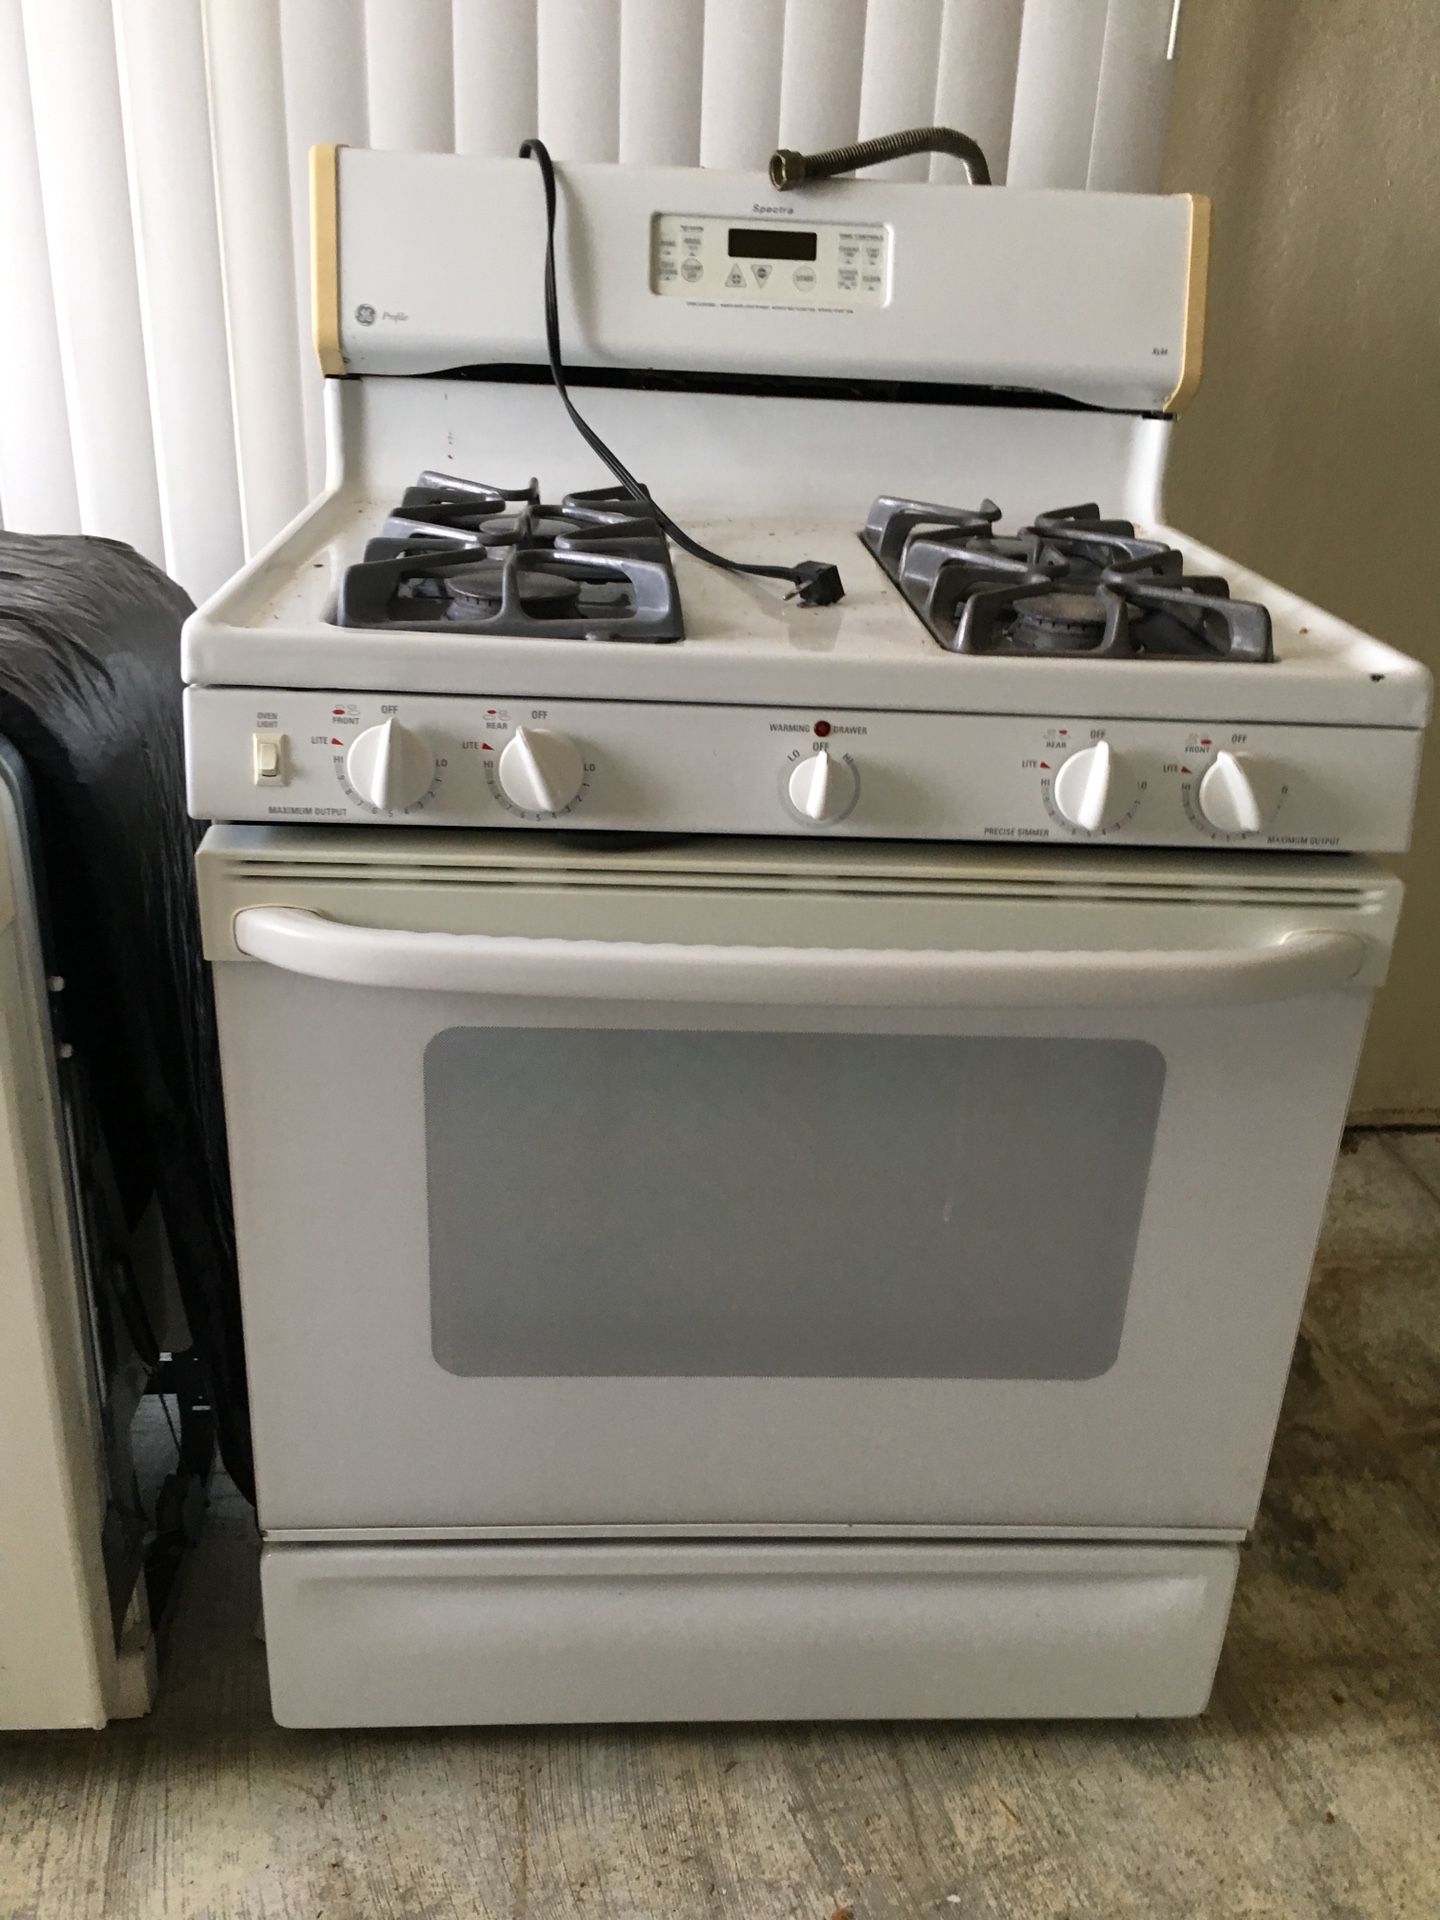 GE triton XL dishwasher and also GE Profile spectra gas stove retails for $475 dishwasher 300+ very nice condition salad boat for 425 will post more